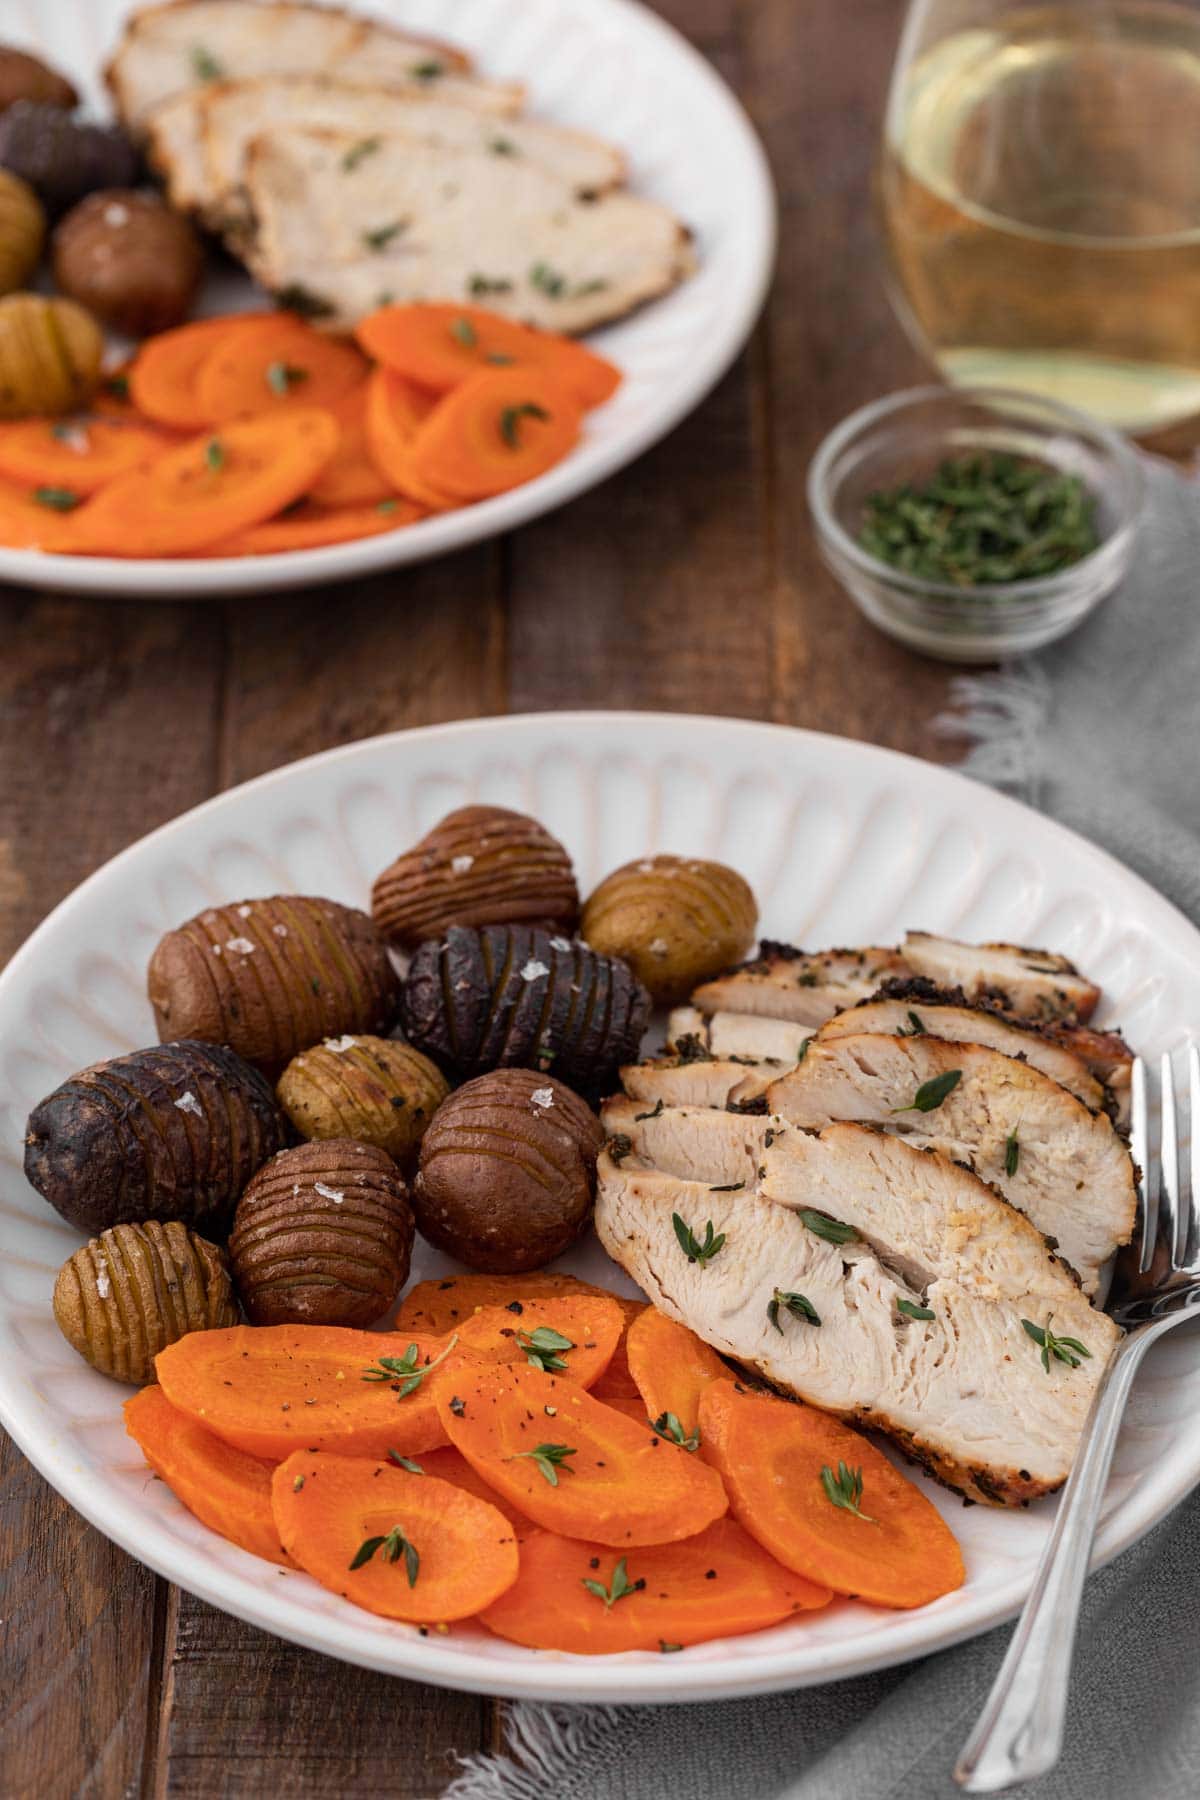 Air Fryer Herb Butter Turkey Breast two plates of sliced cooked turkey with carrots and mini hasselback potatoes, glass of white wine to right